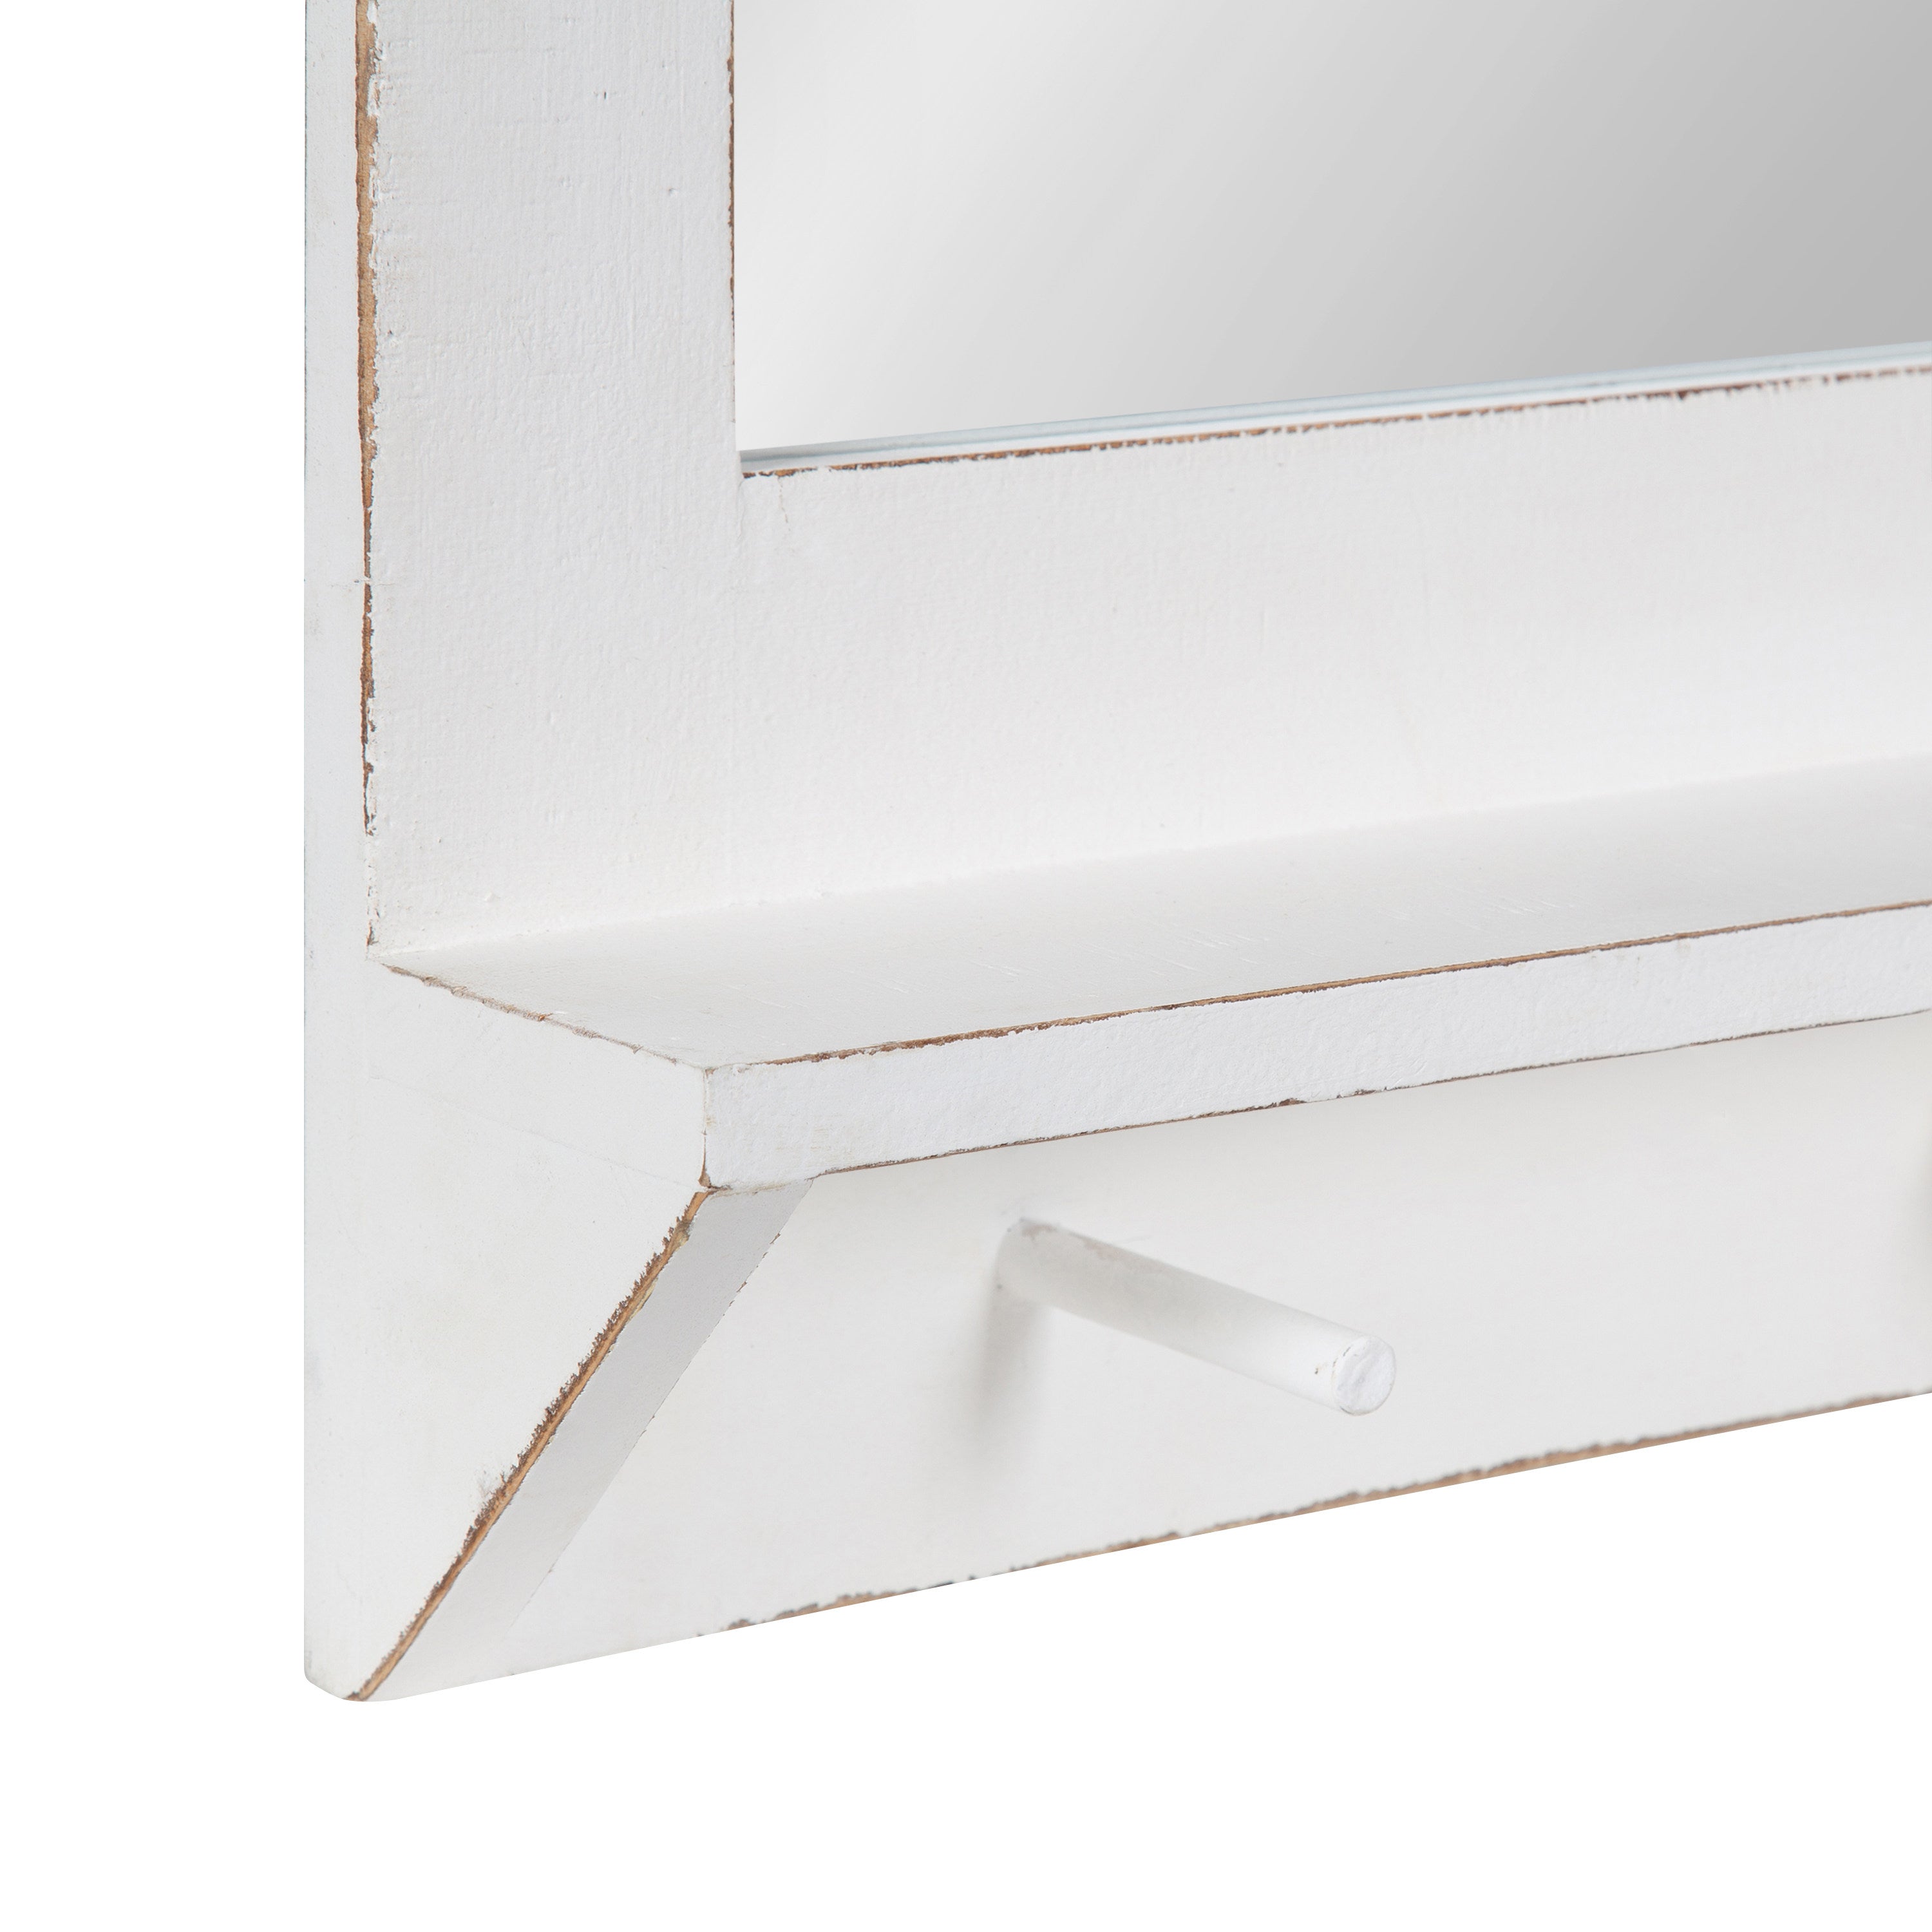 Cates Framed Wall Mirror with Shelf and Hooks